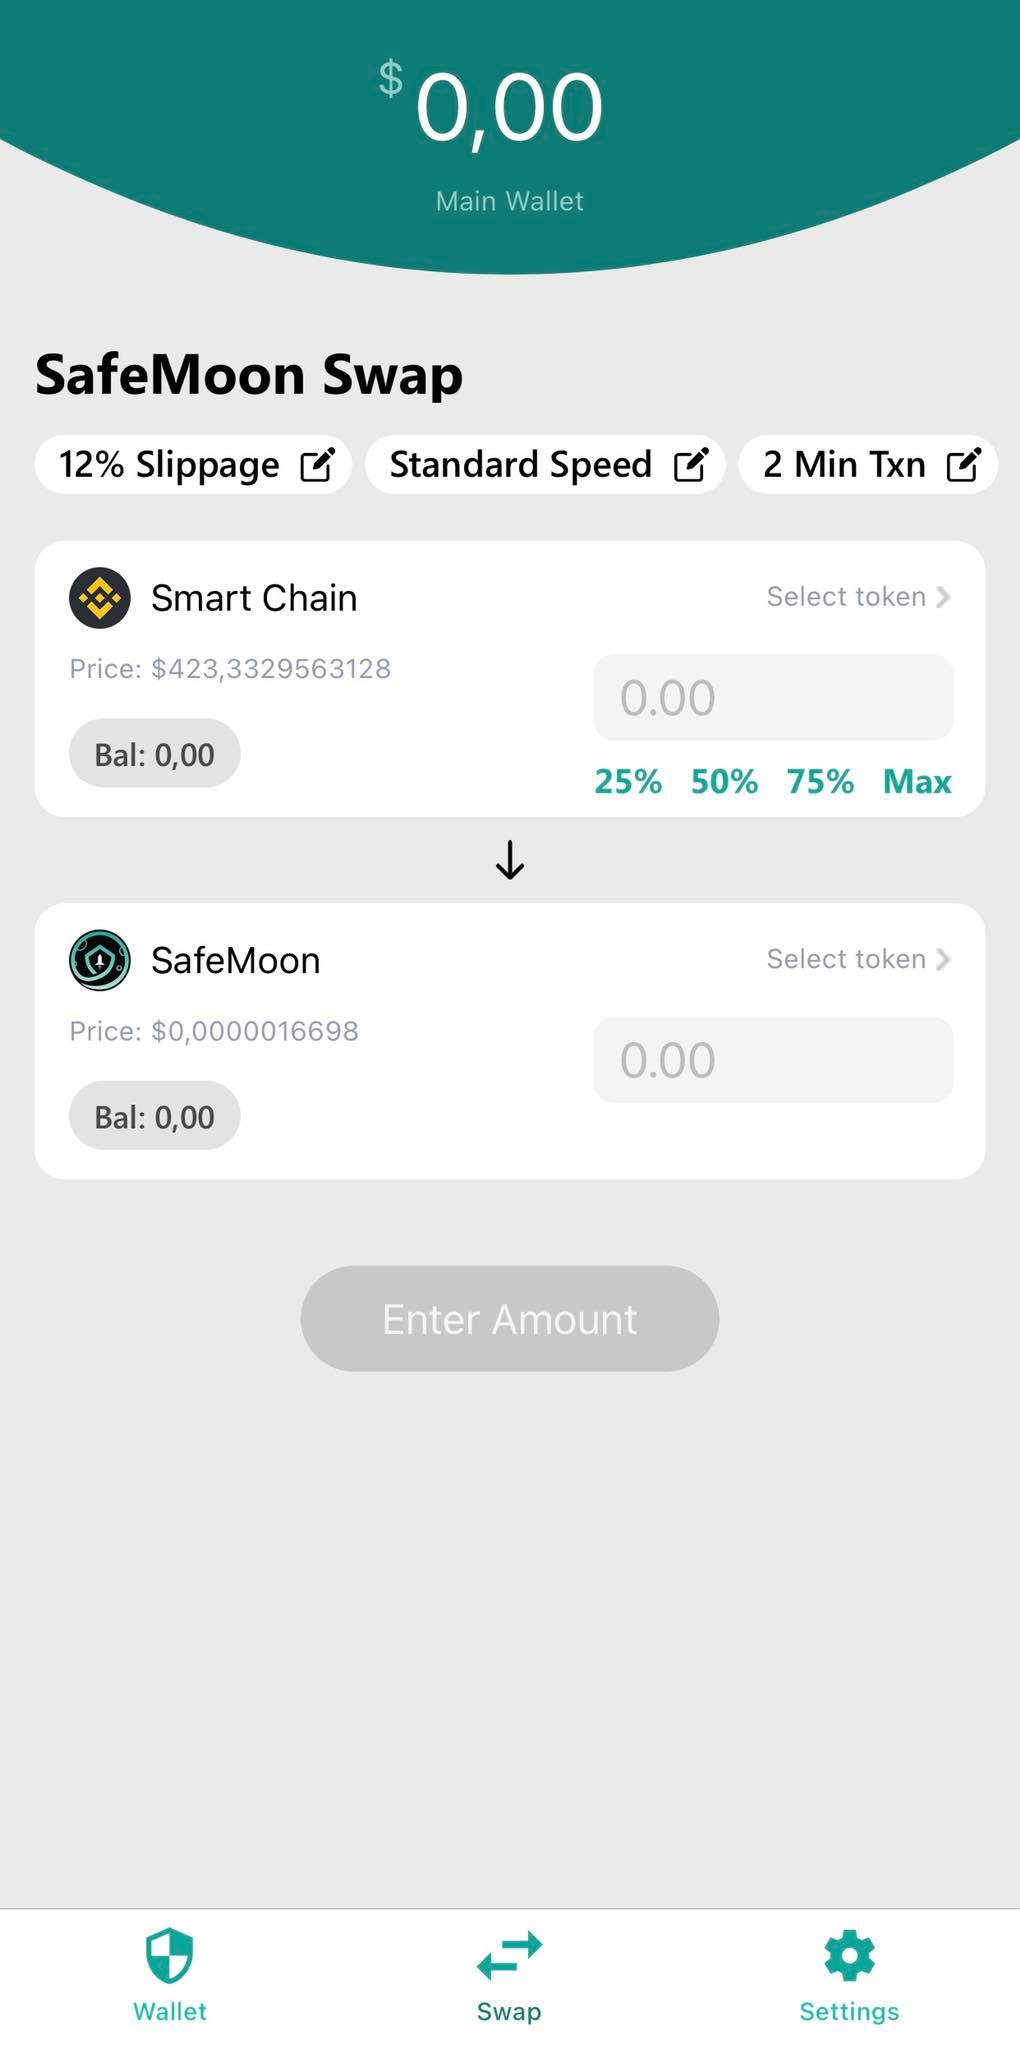 How to Buy SafeMoon in Asia - A Detailed Guide